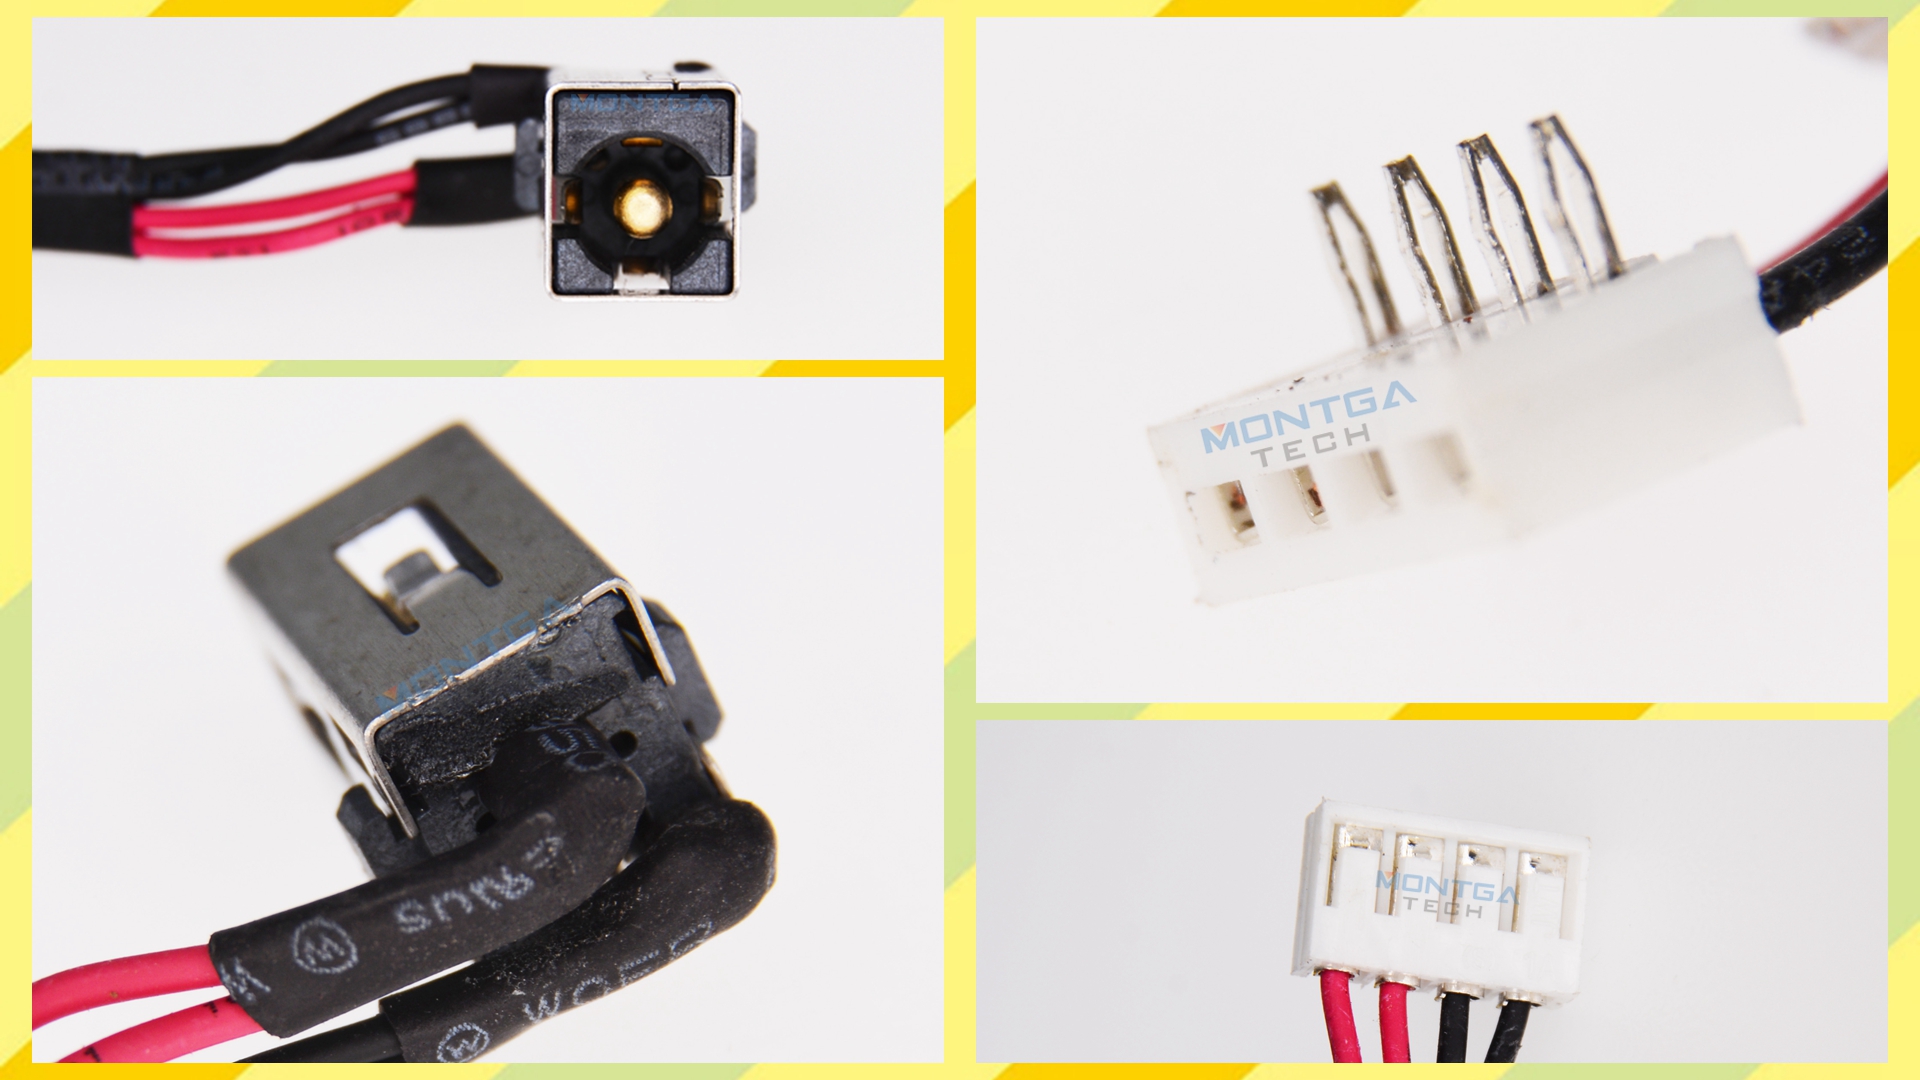 Asus R900V charging connector, Asus R900V DC Power Jack, Asus R900V DC IN Cable, Asus R900V Power Jack, Asus R900V plug, Asus R900V Jack socket, Asus R900V connecteur de charge, 